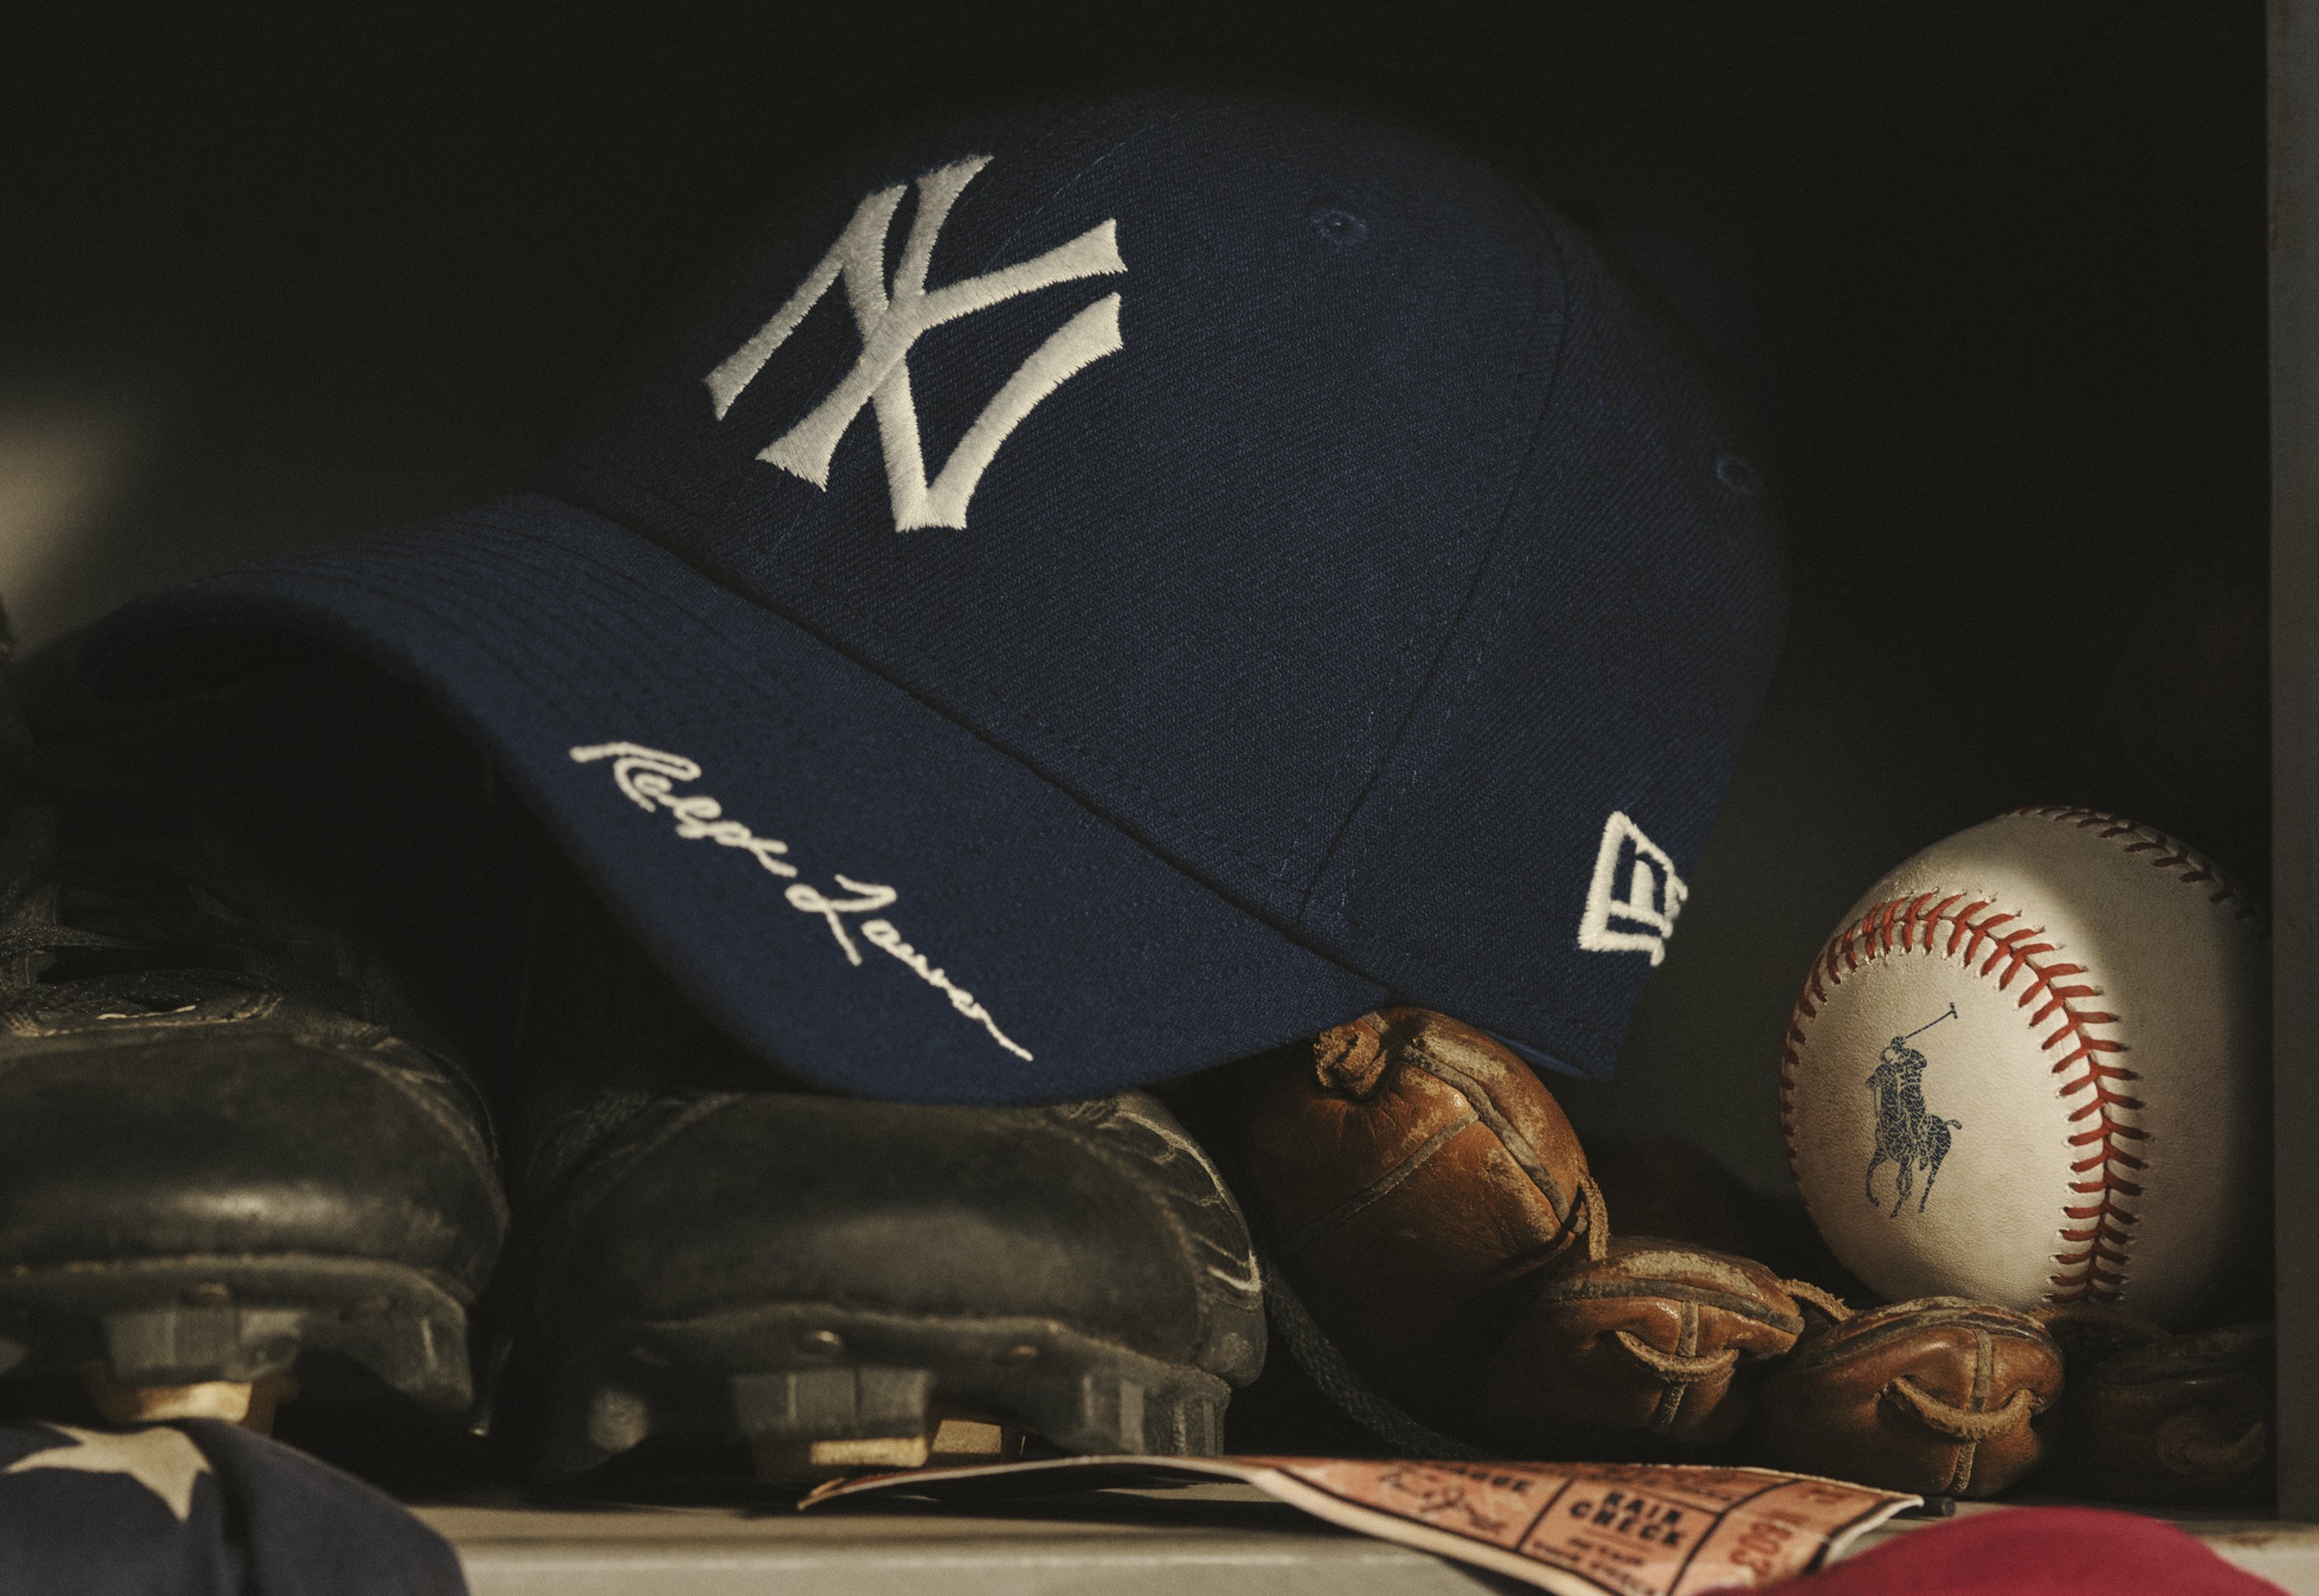 Ralph Lauren Creates Limited-Edition Yankees Collection